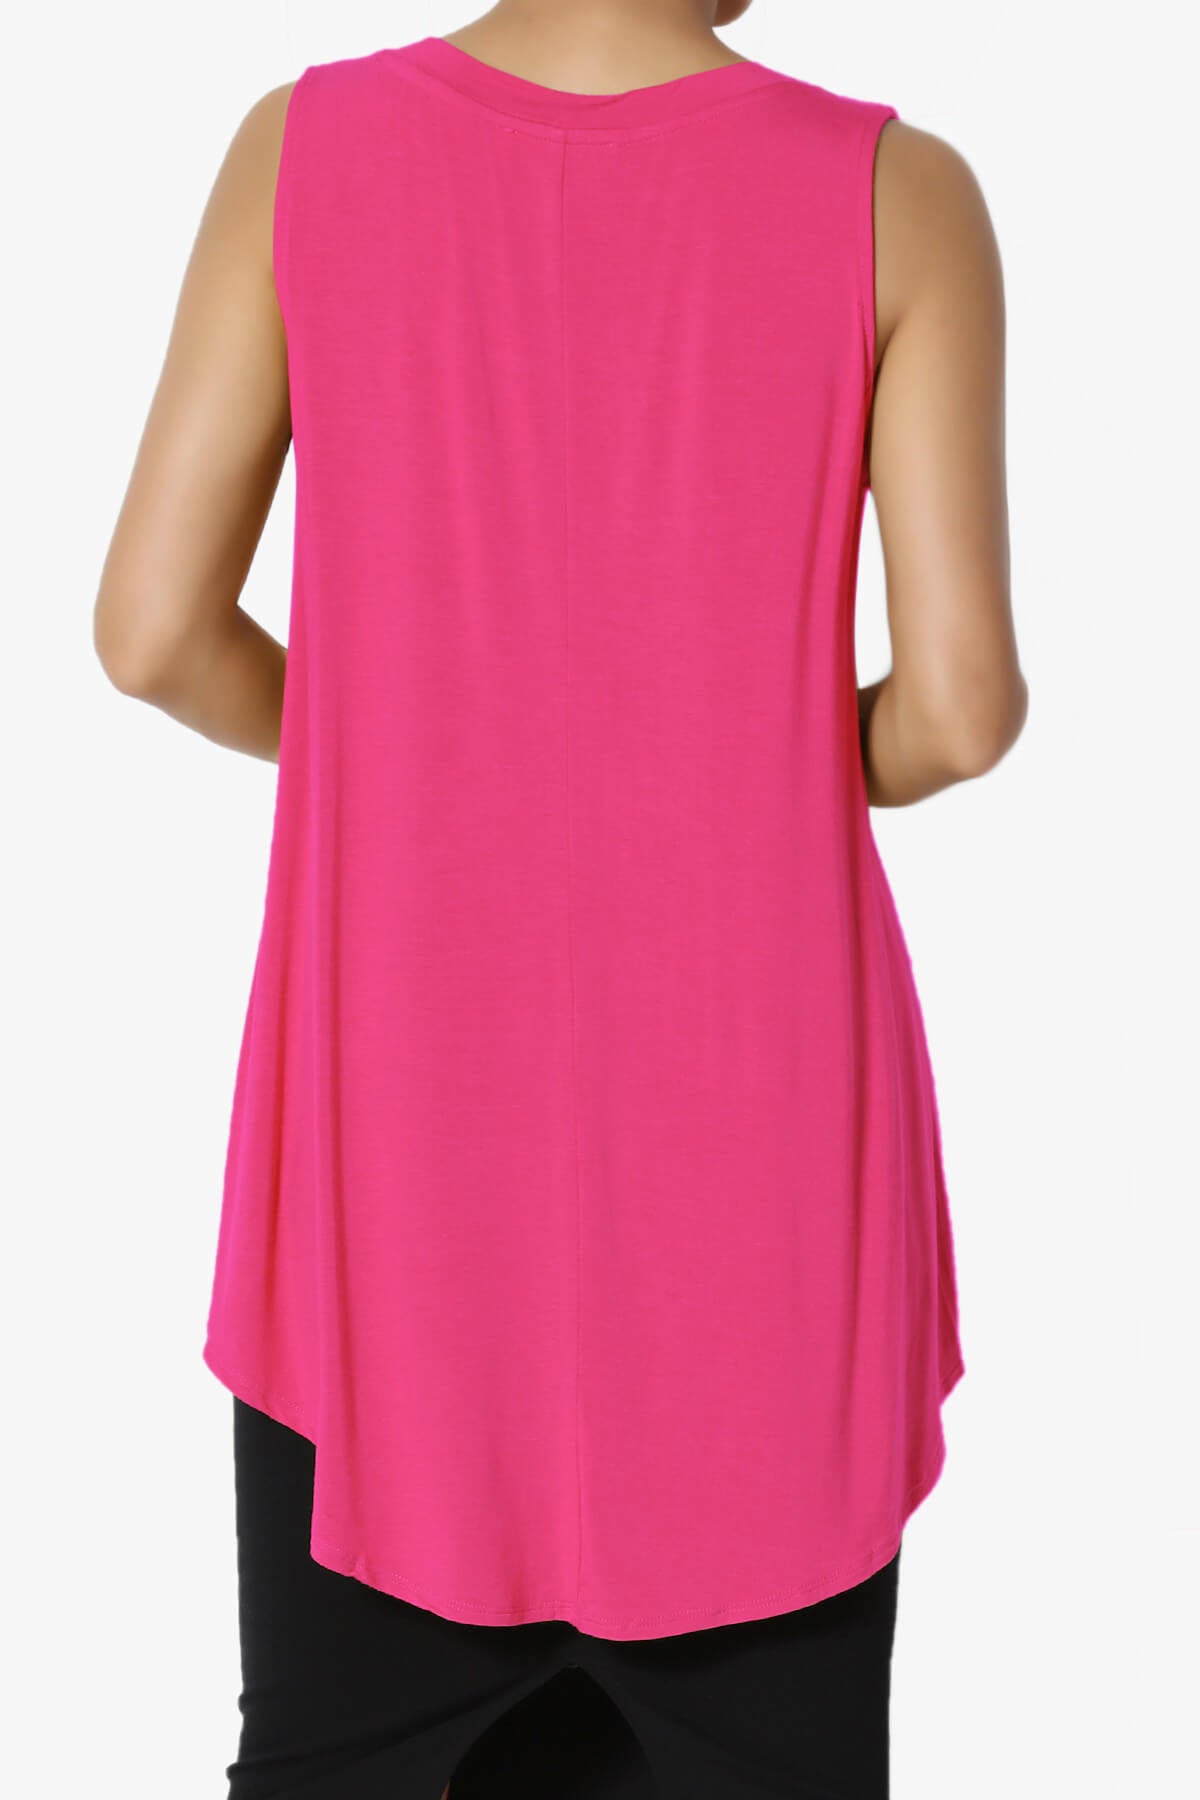 Myles Sleeveless V-Neck Luxe Jersey Top HOT PINK_2